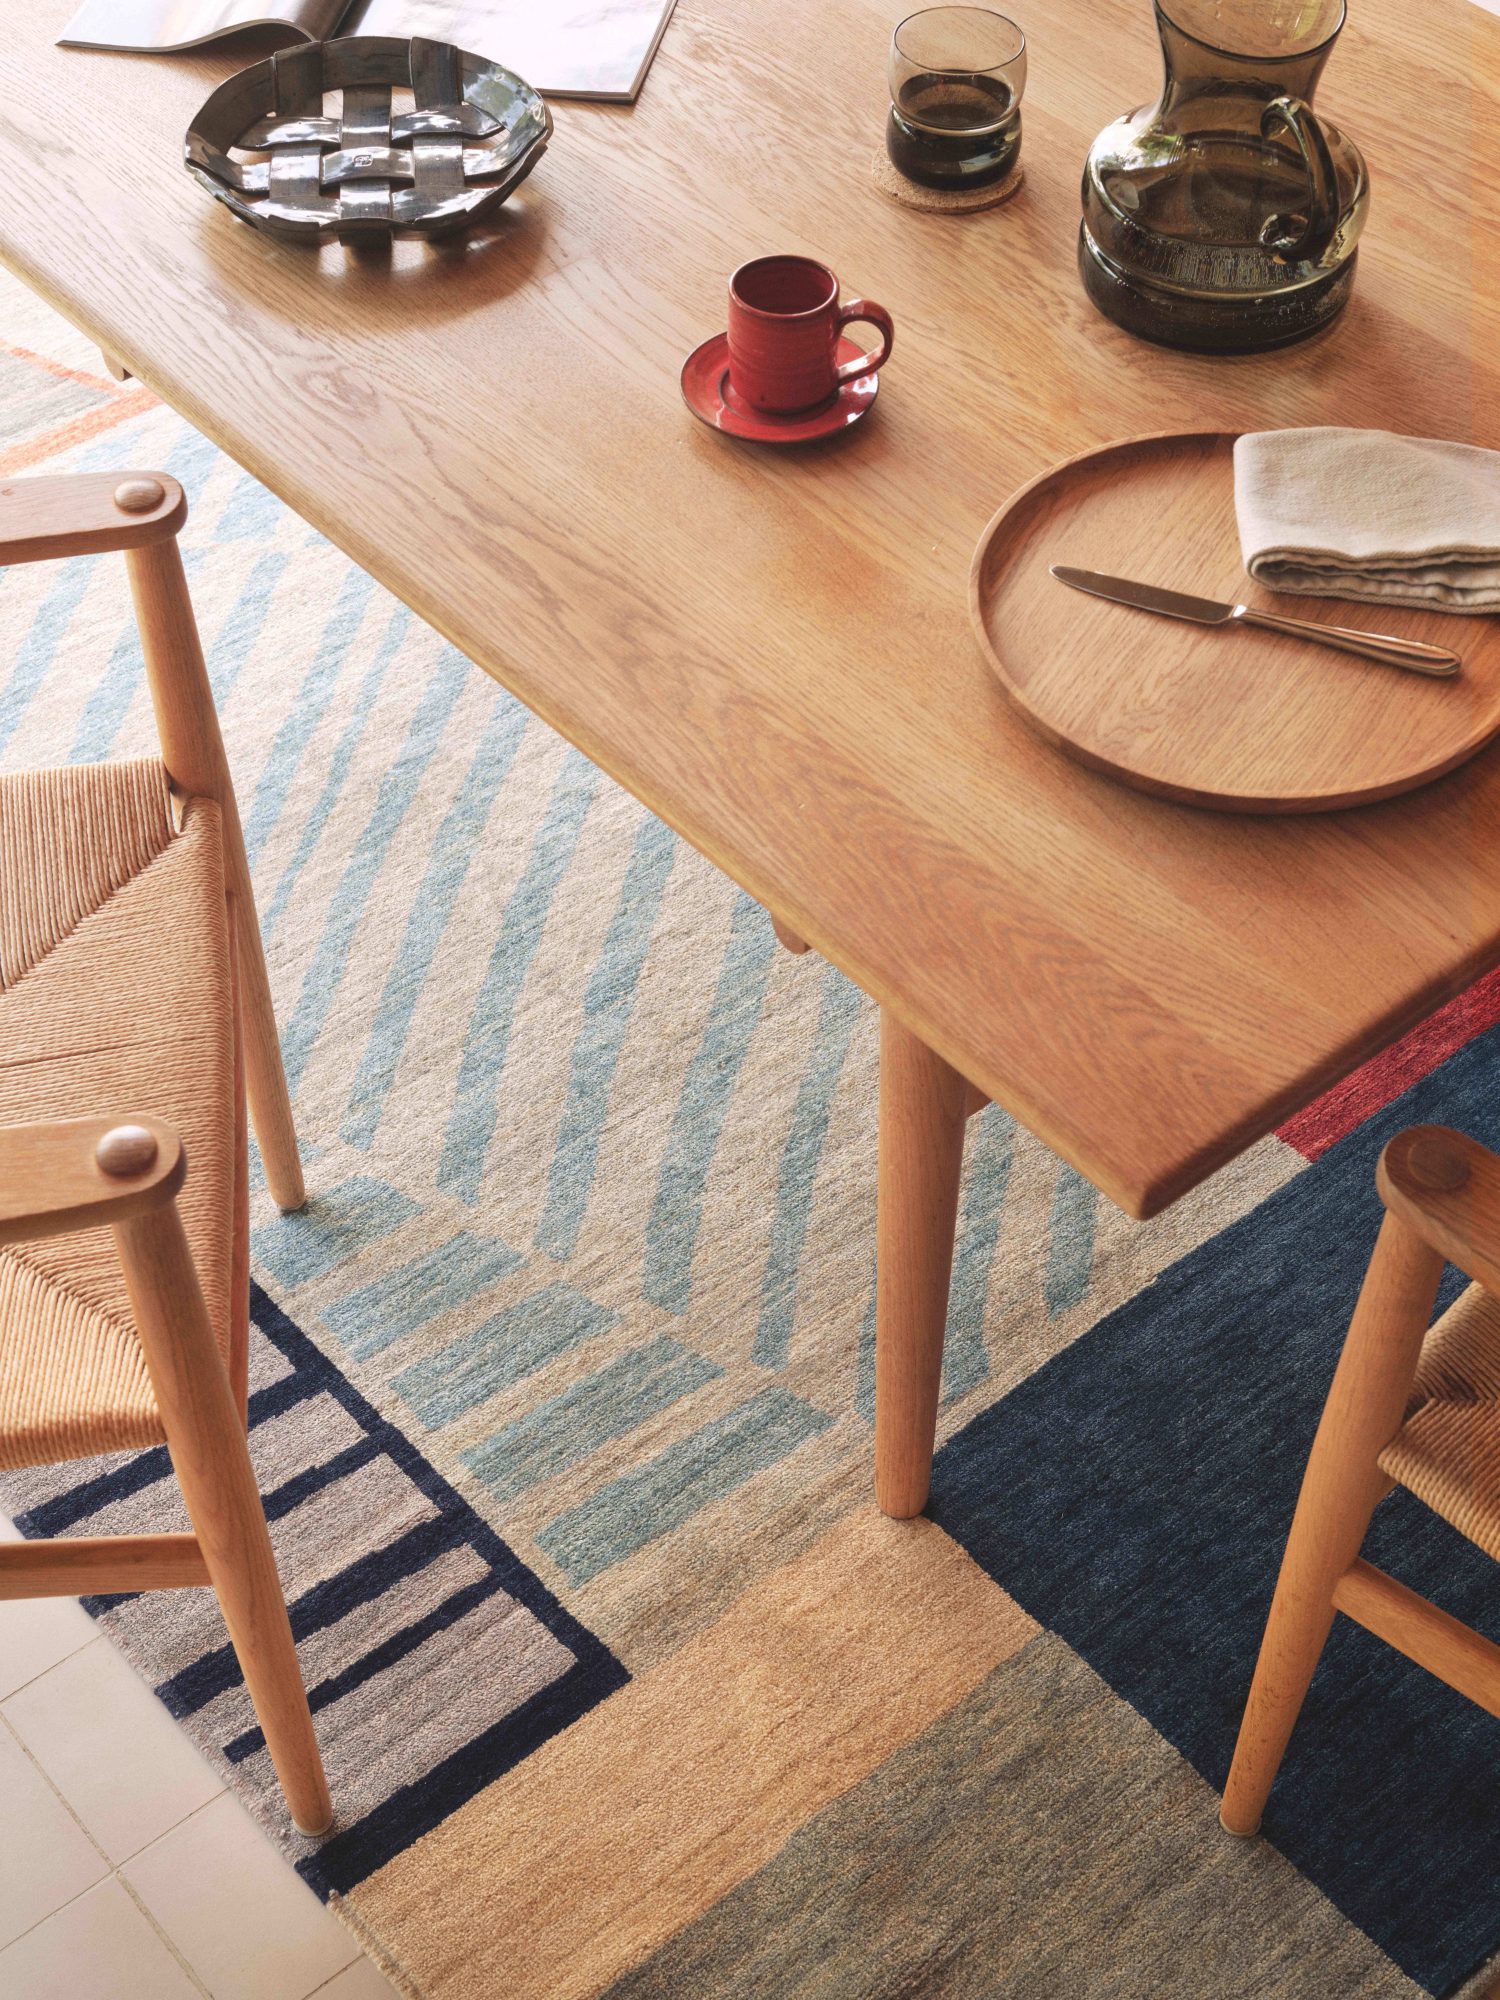 The textural Pleat hand knotted rug from the Verso collection features intersecting lines in blue, gray and red tones.